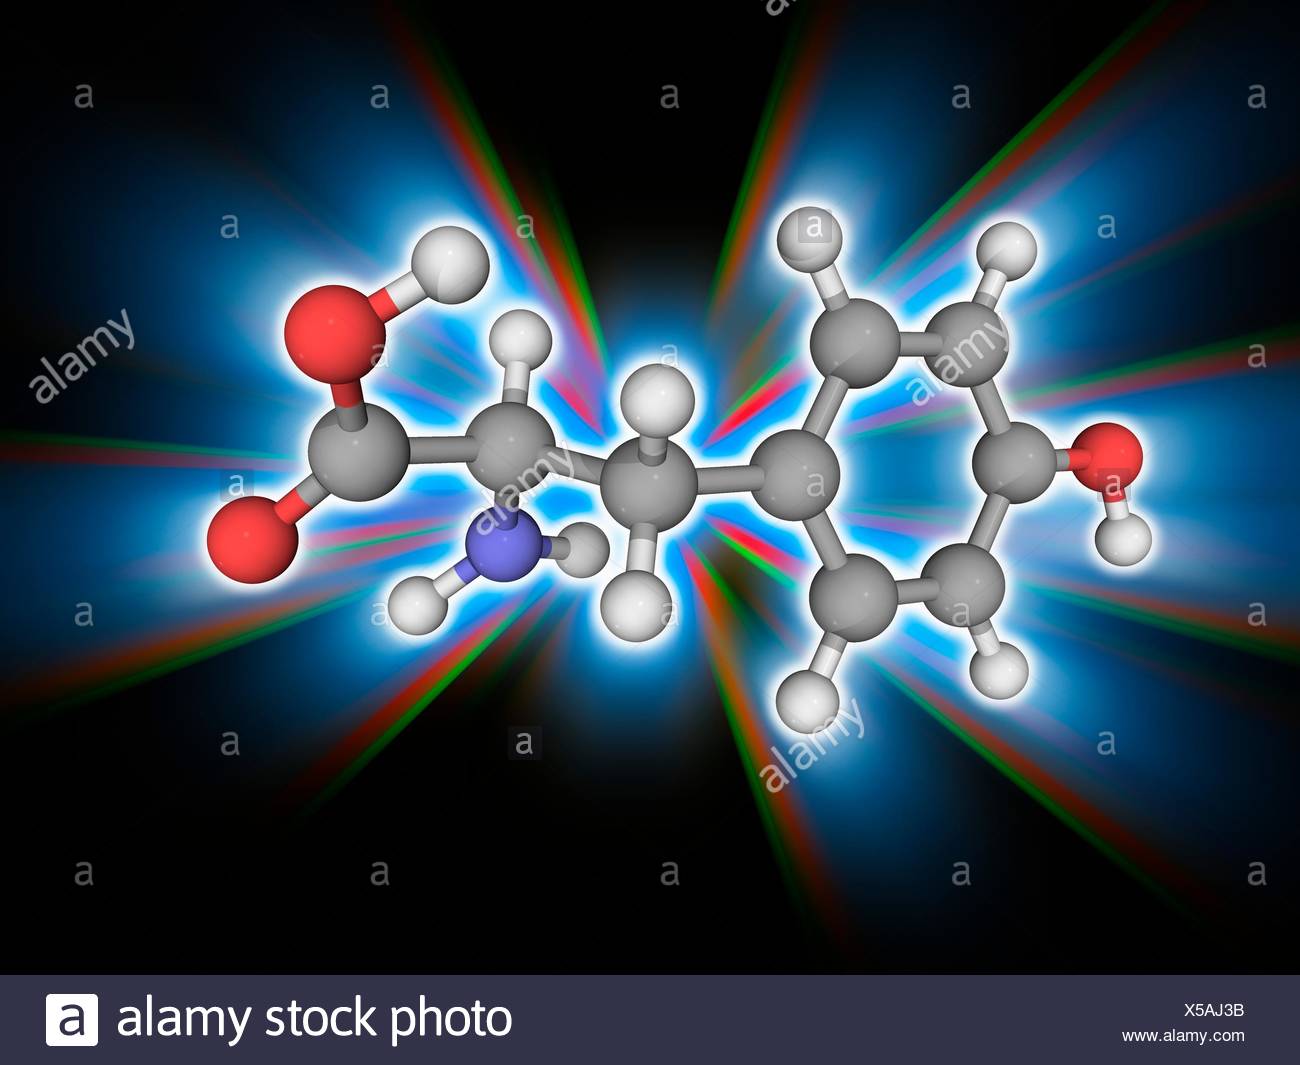 Tyrosine Molecular Model Of The Non Essential Amino Acid Tyrosine C9 H11 N O3 One Of The Amino Acids Used To Synthesize Proteins Proteinogenic Atoms Are Represented As Spheres And Are Colour Coded Carbon Grey Hydrogen